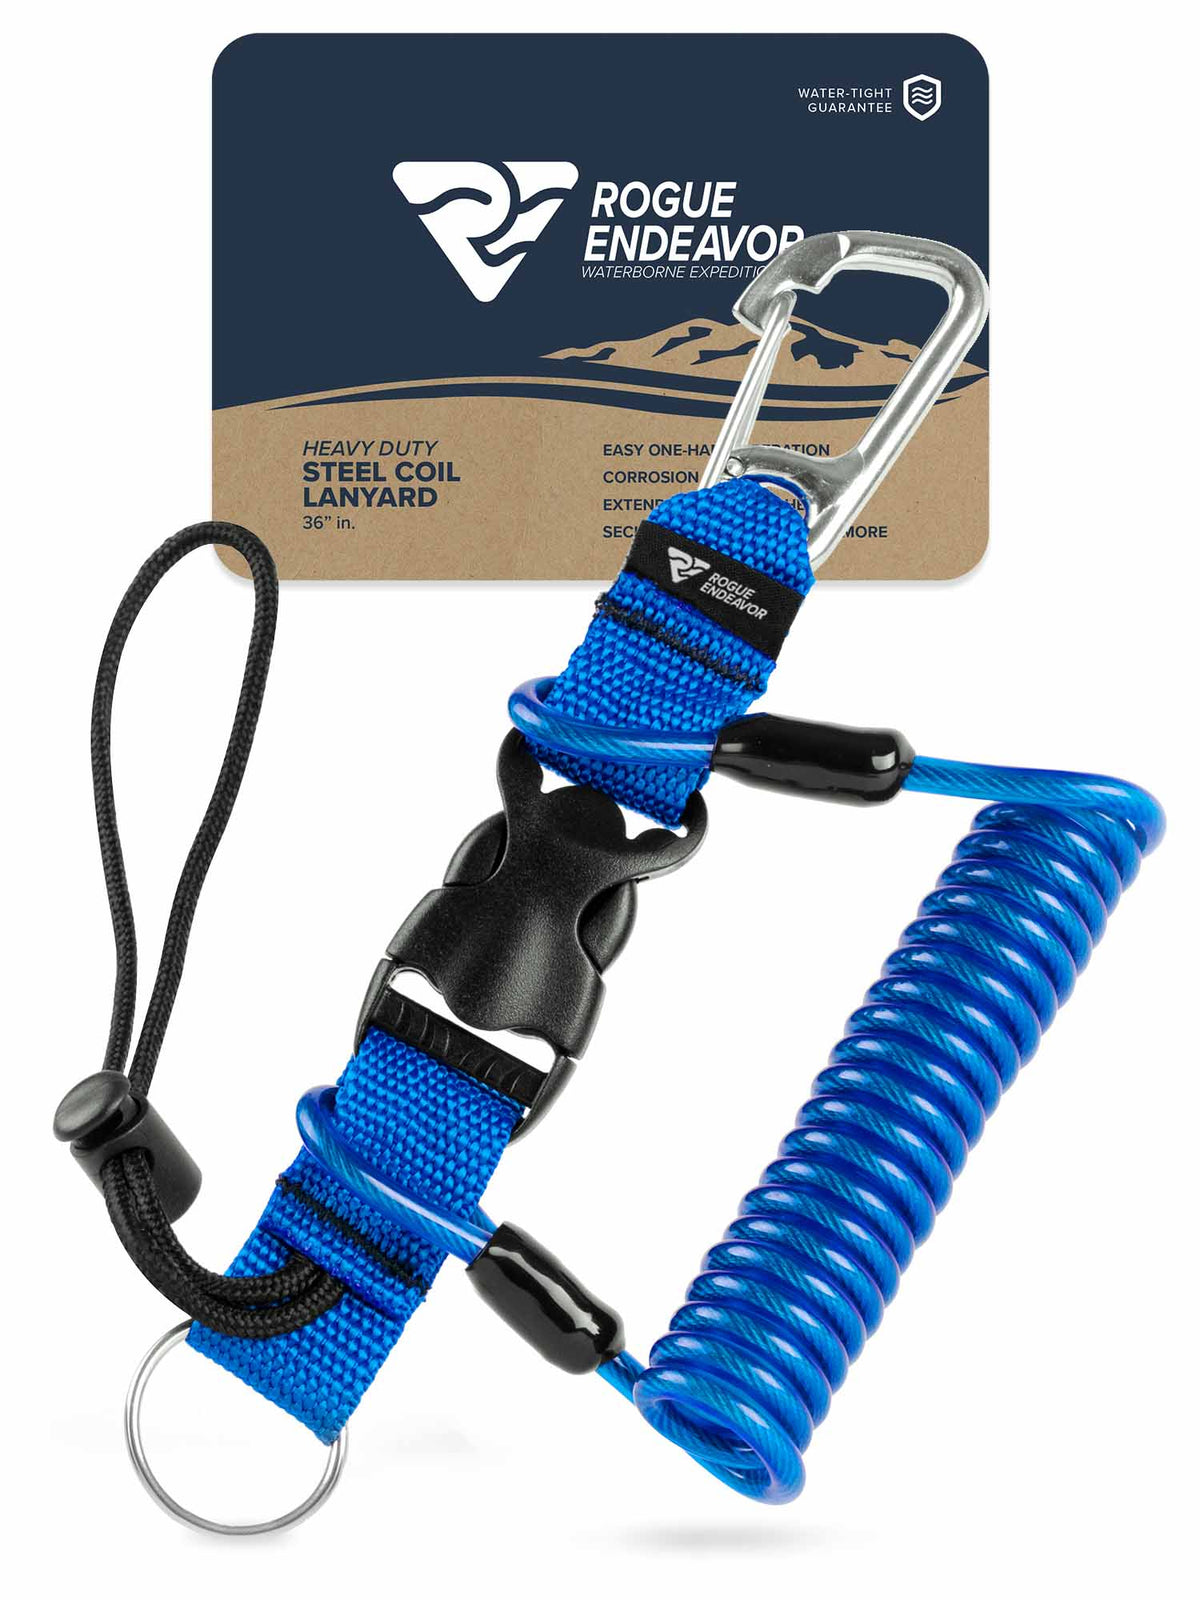 Rogue Endeavor Heavy Duty Dive Snappy Coil, Stainless Clip, Split Ring & Slide Lock Lanyard, Quick Release Buckle, 36 Steel Core Lanyard, Ideal for